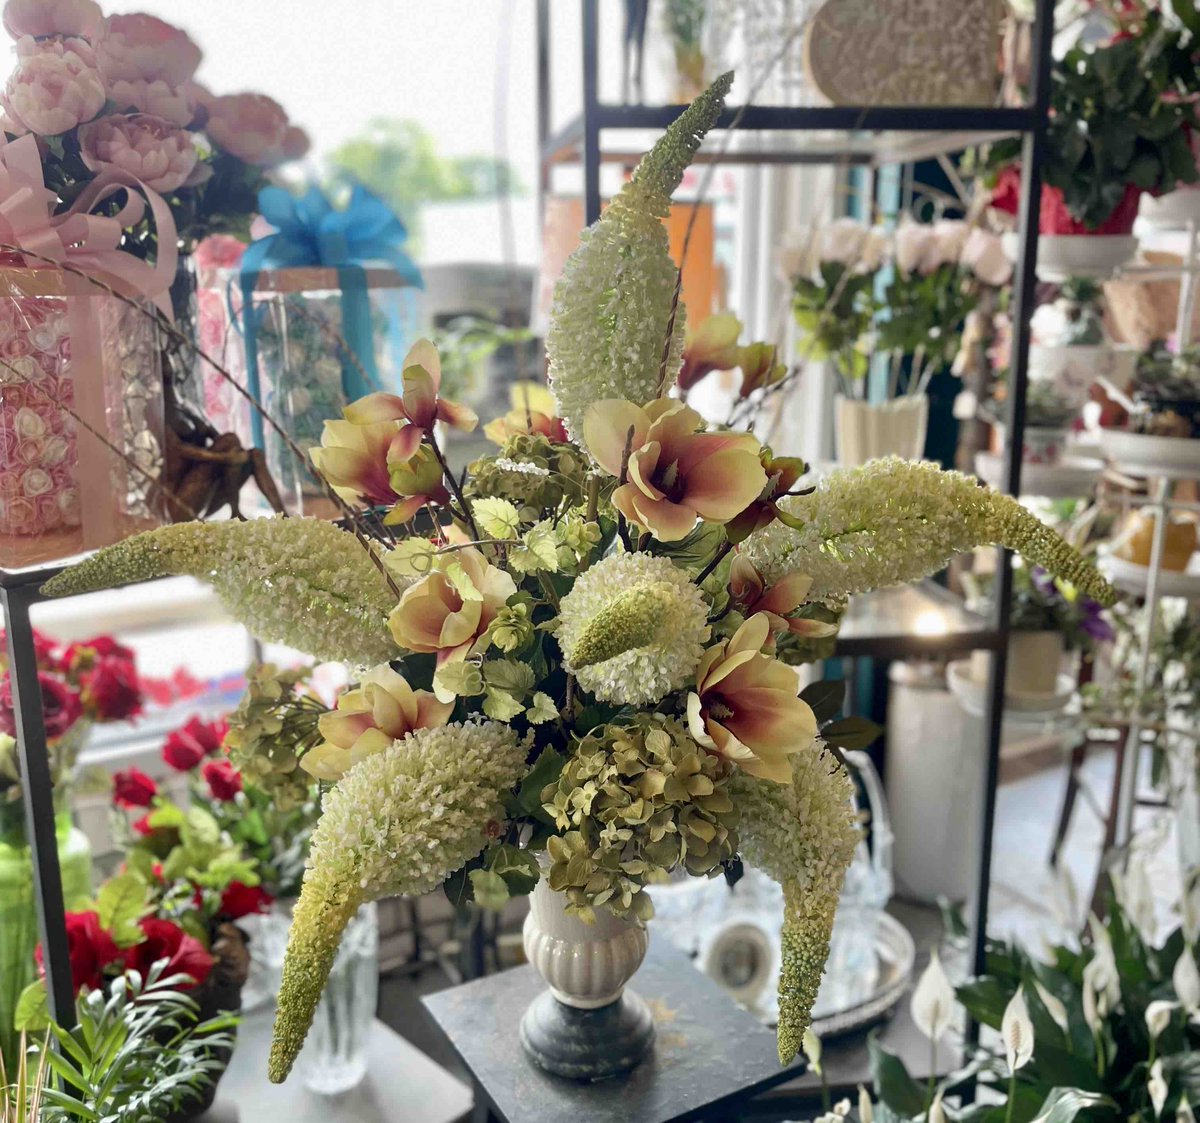 Keep your spaces in bloom all the time with artificial arrangements.
.
.
#steinflorist #steinyourflorist #flowers #florist #flowershop #shopsmall #shoplocal #smallbusiness #phillyflorist #NJflorist #artificialflowers #fakeflowers #fauxflowers #silkflowers #foxtail #beautiful